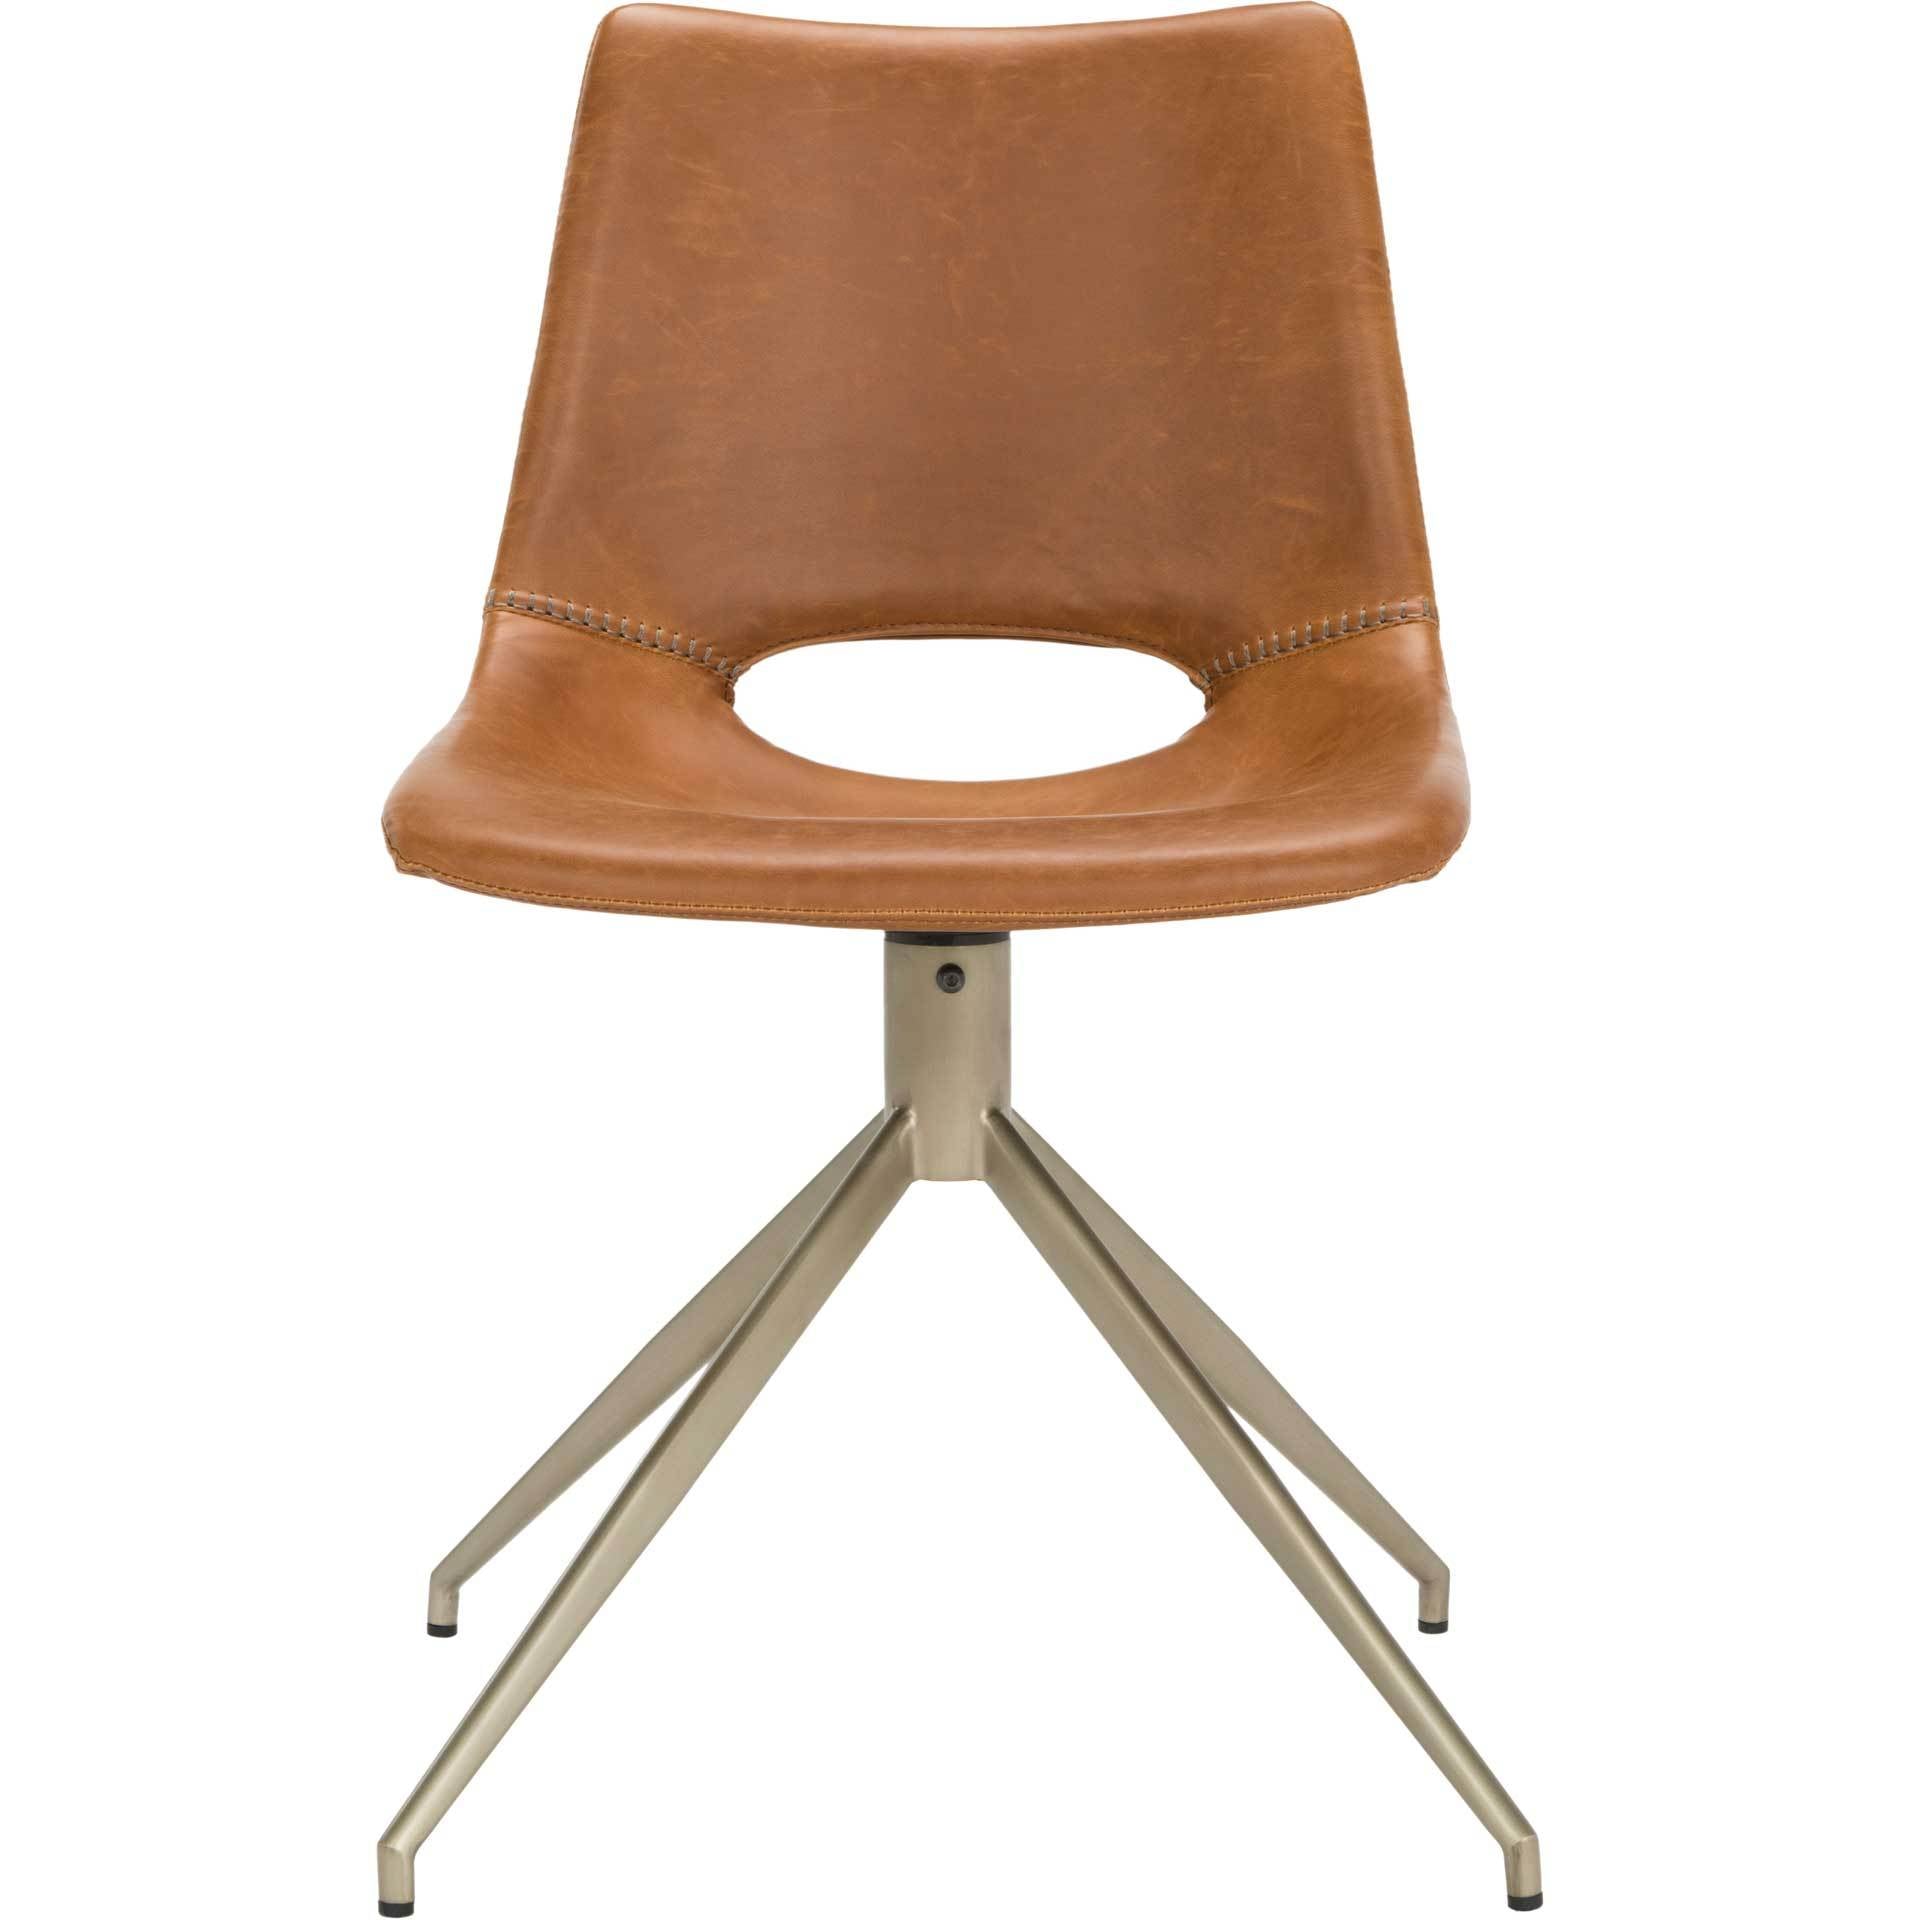 Dalary Leather Swivel Chair Light Brown (Set of 2)